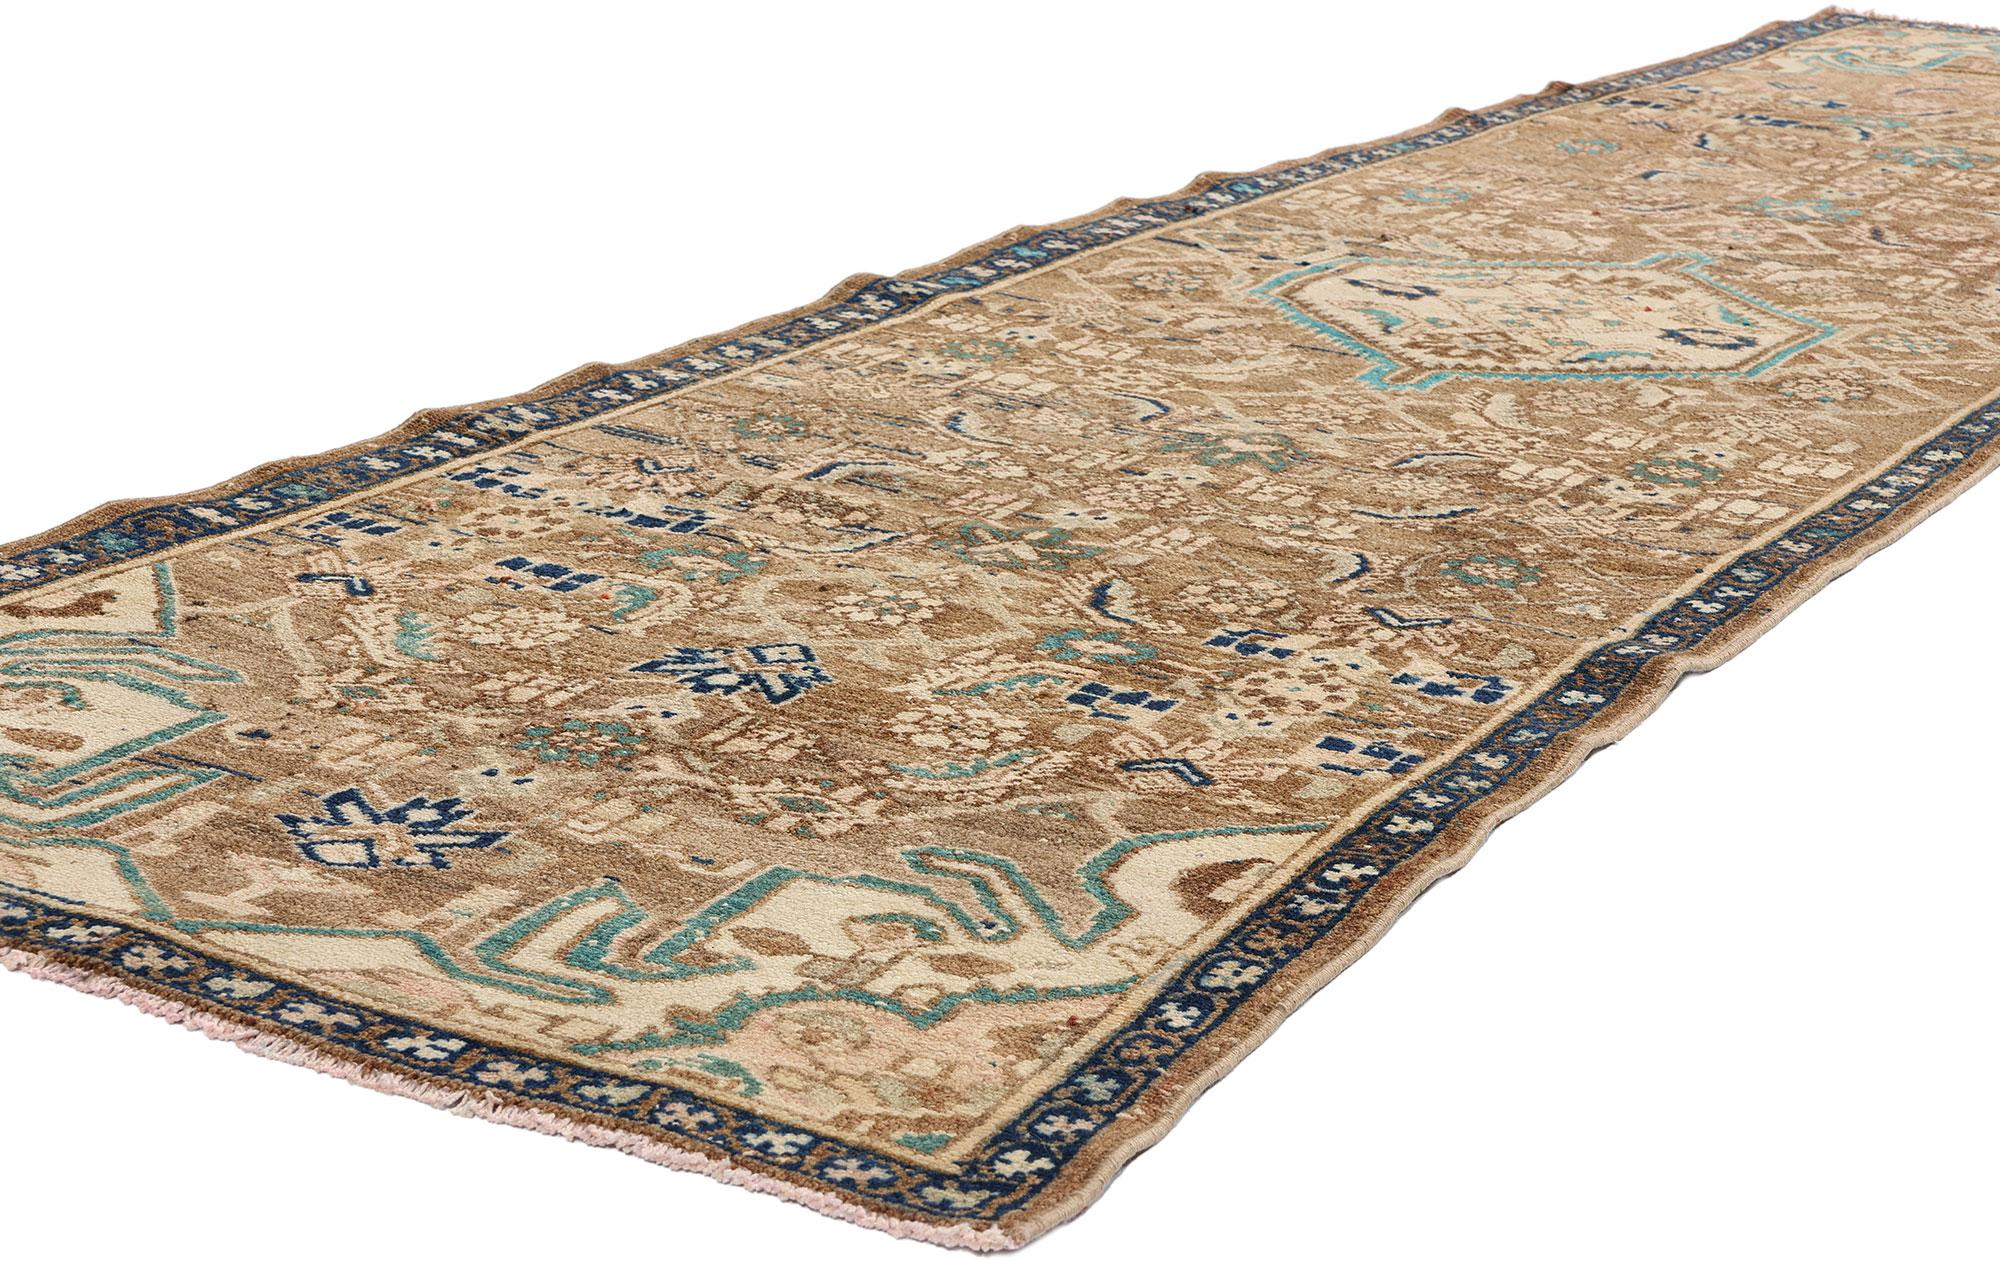 53940 Vintage Persian Malayer Hamadan Rug Runner, 02'09 x 09'01. Persian Malayer Hamadan carpet runners are narrow, elongated rugs handwoven in the Malayer area within Iran's Hamadan region, embodying meticulous craftsmanship and traditional